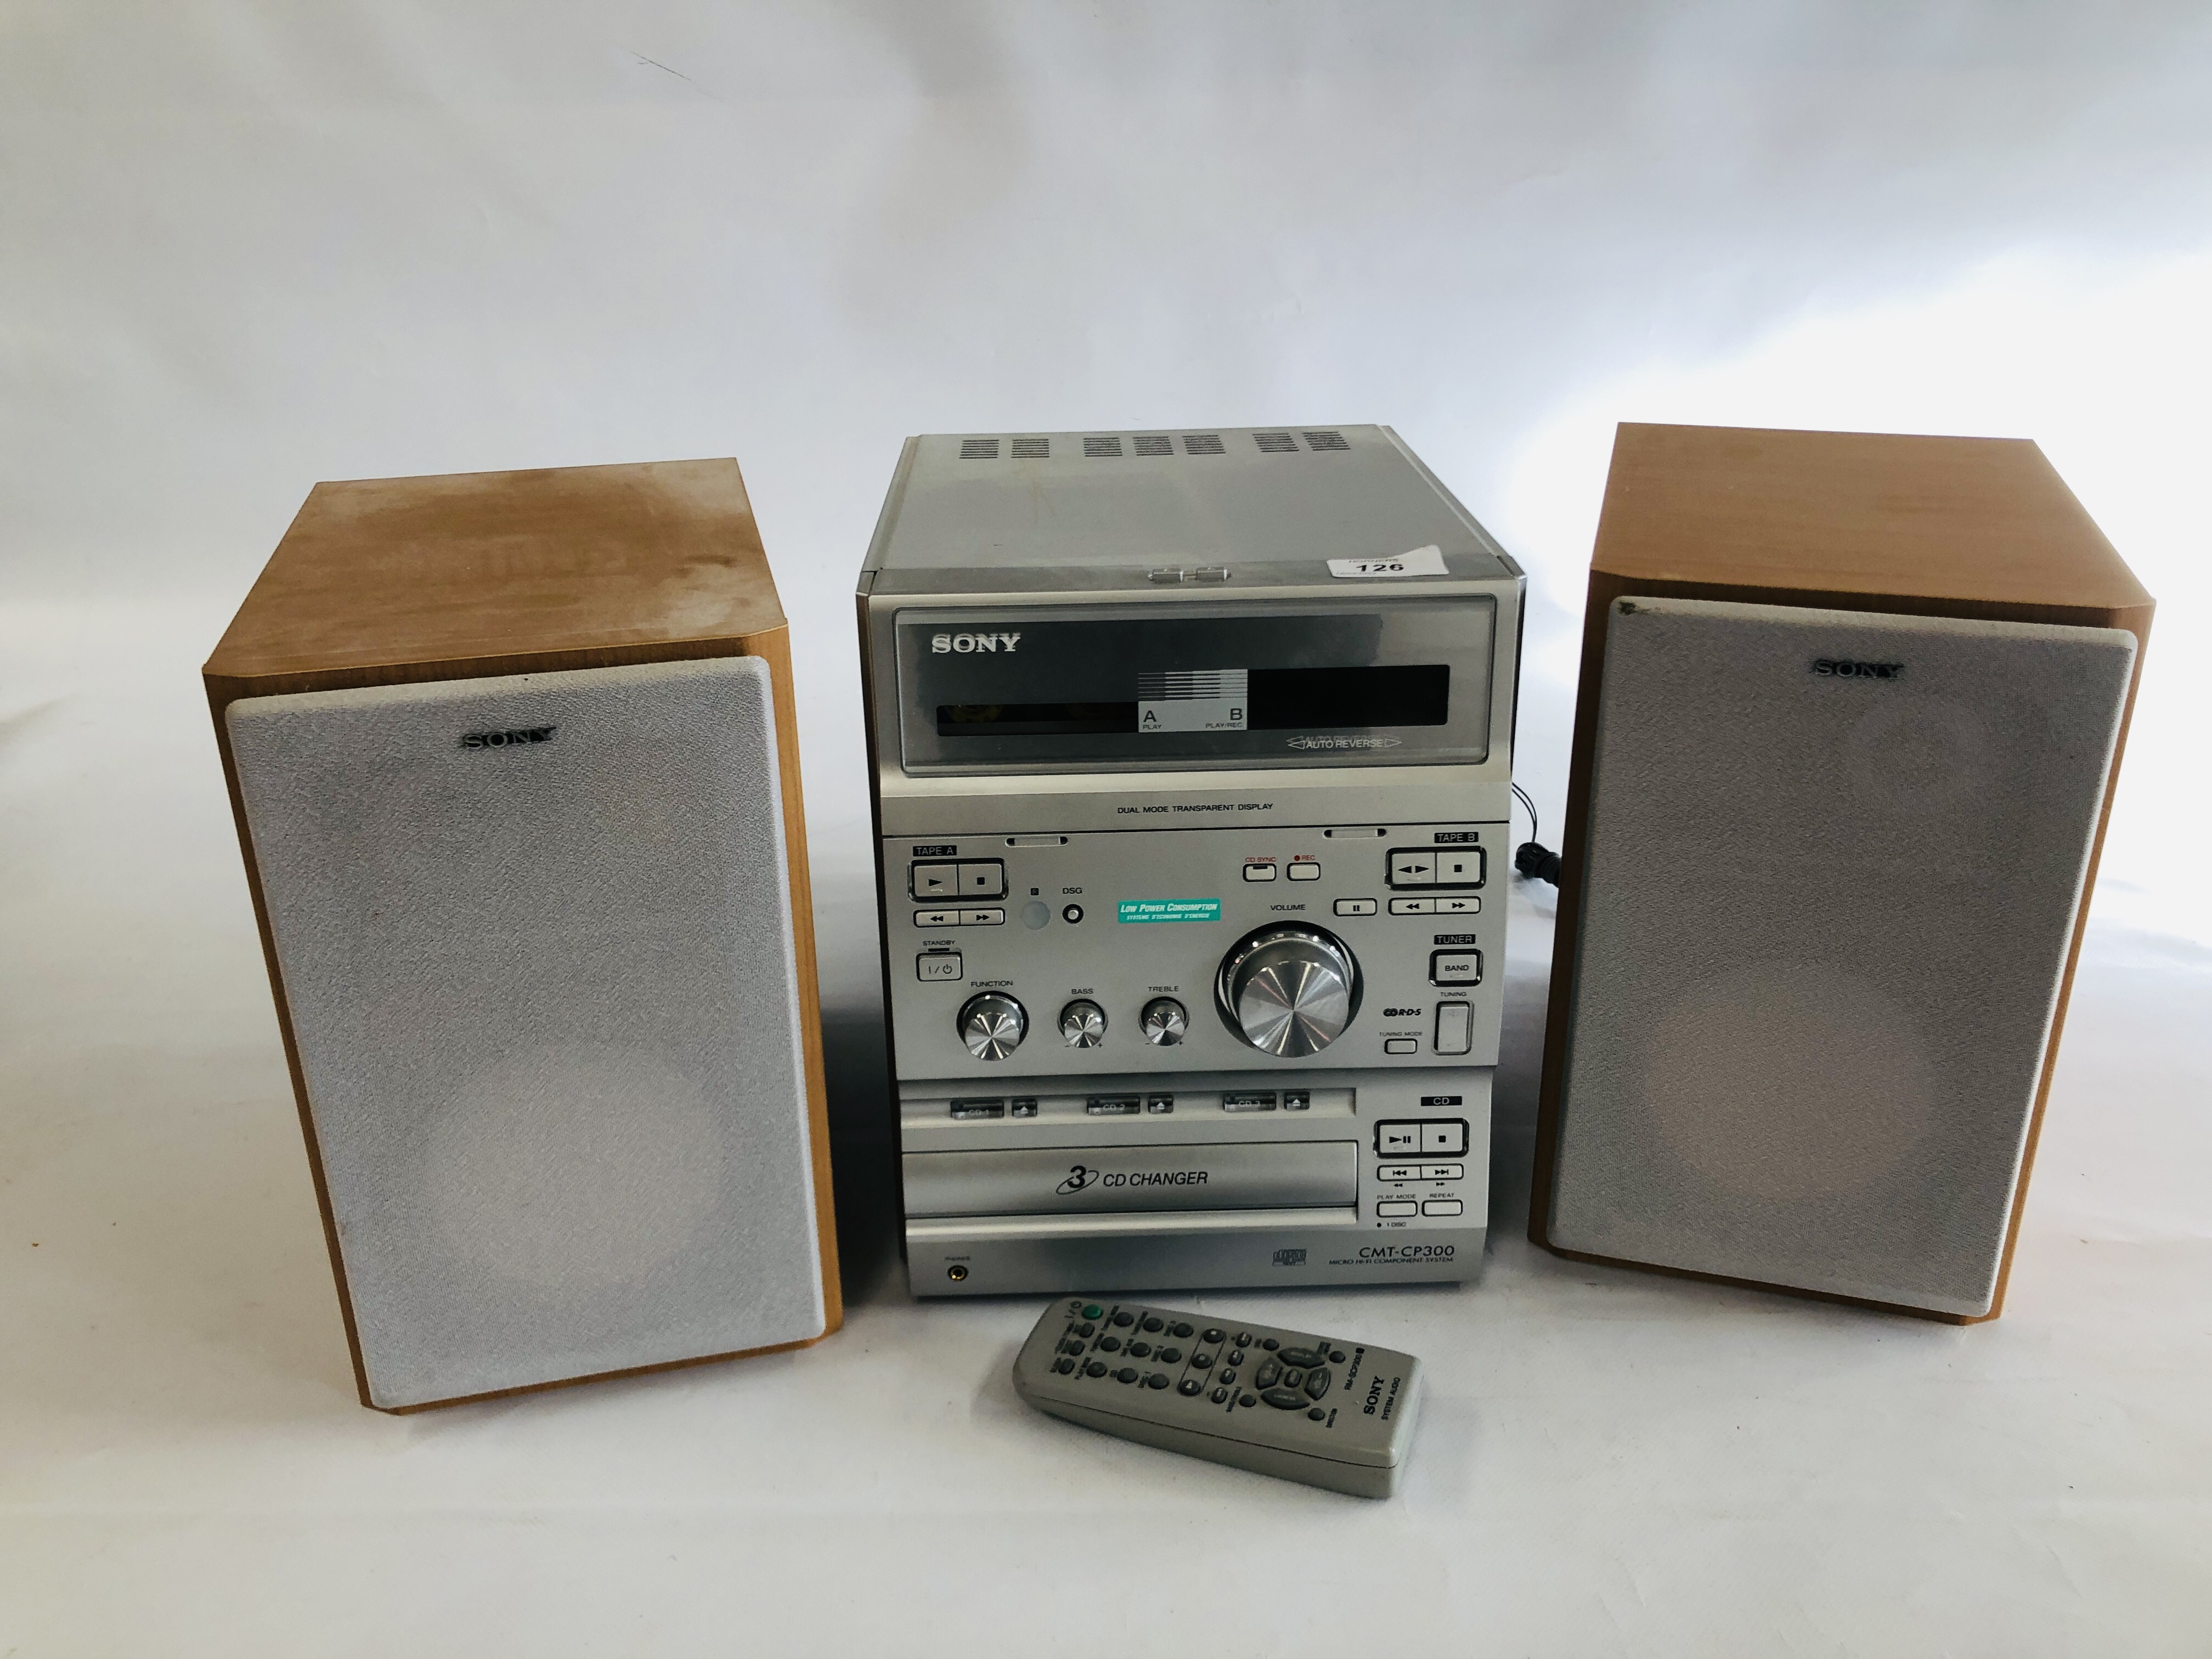 A SONY HIFI SYSTEM WITH SPEAKERS. MODEL CMT-CP300 - SOLD AS SEEN.